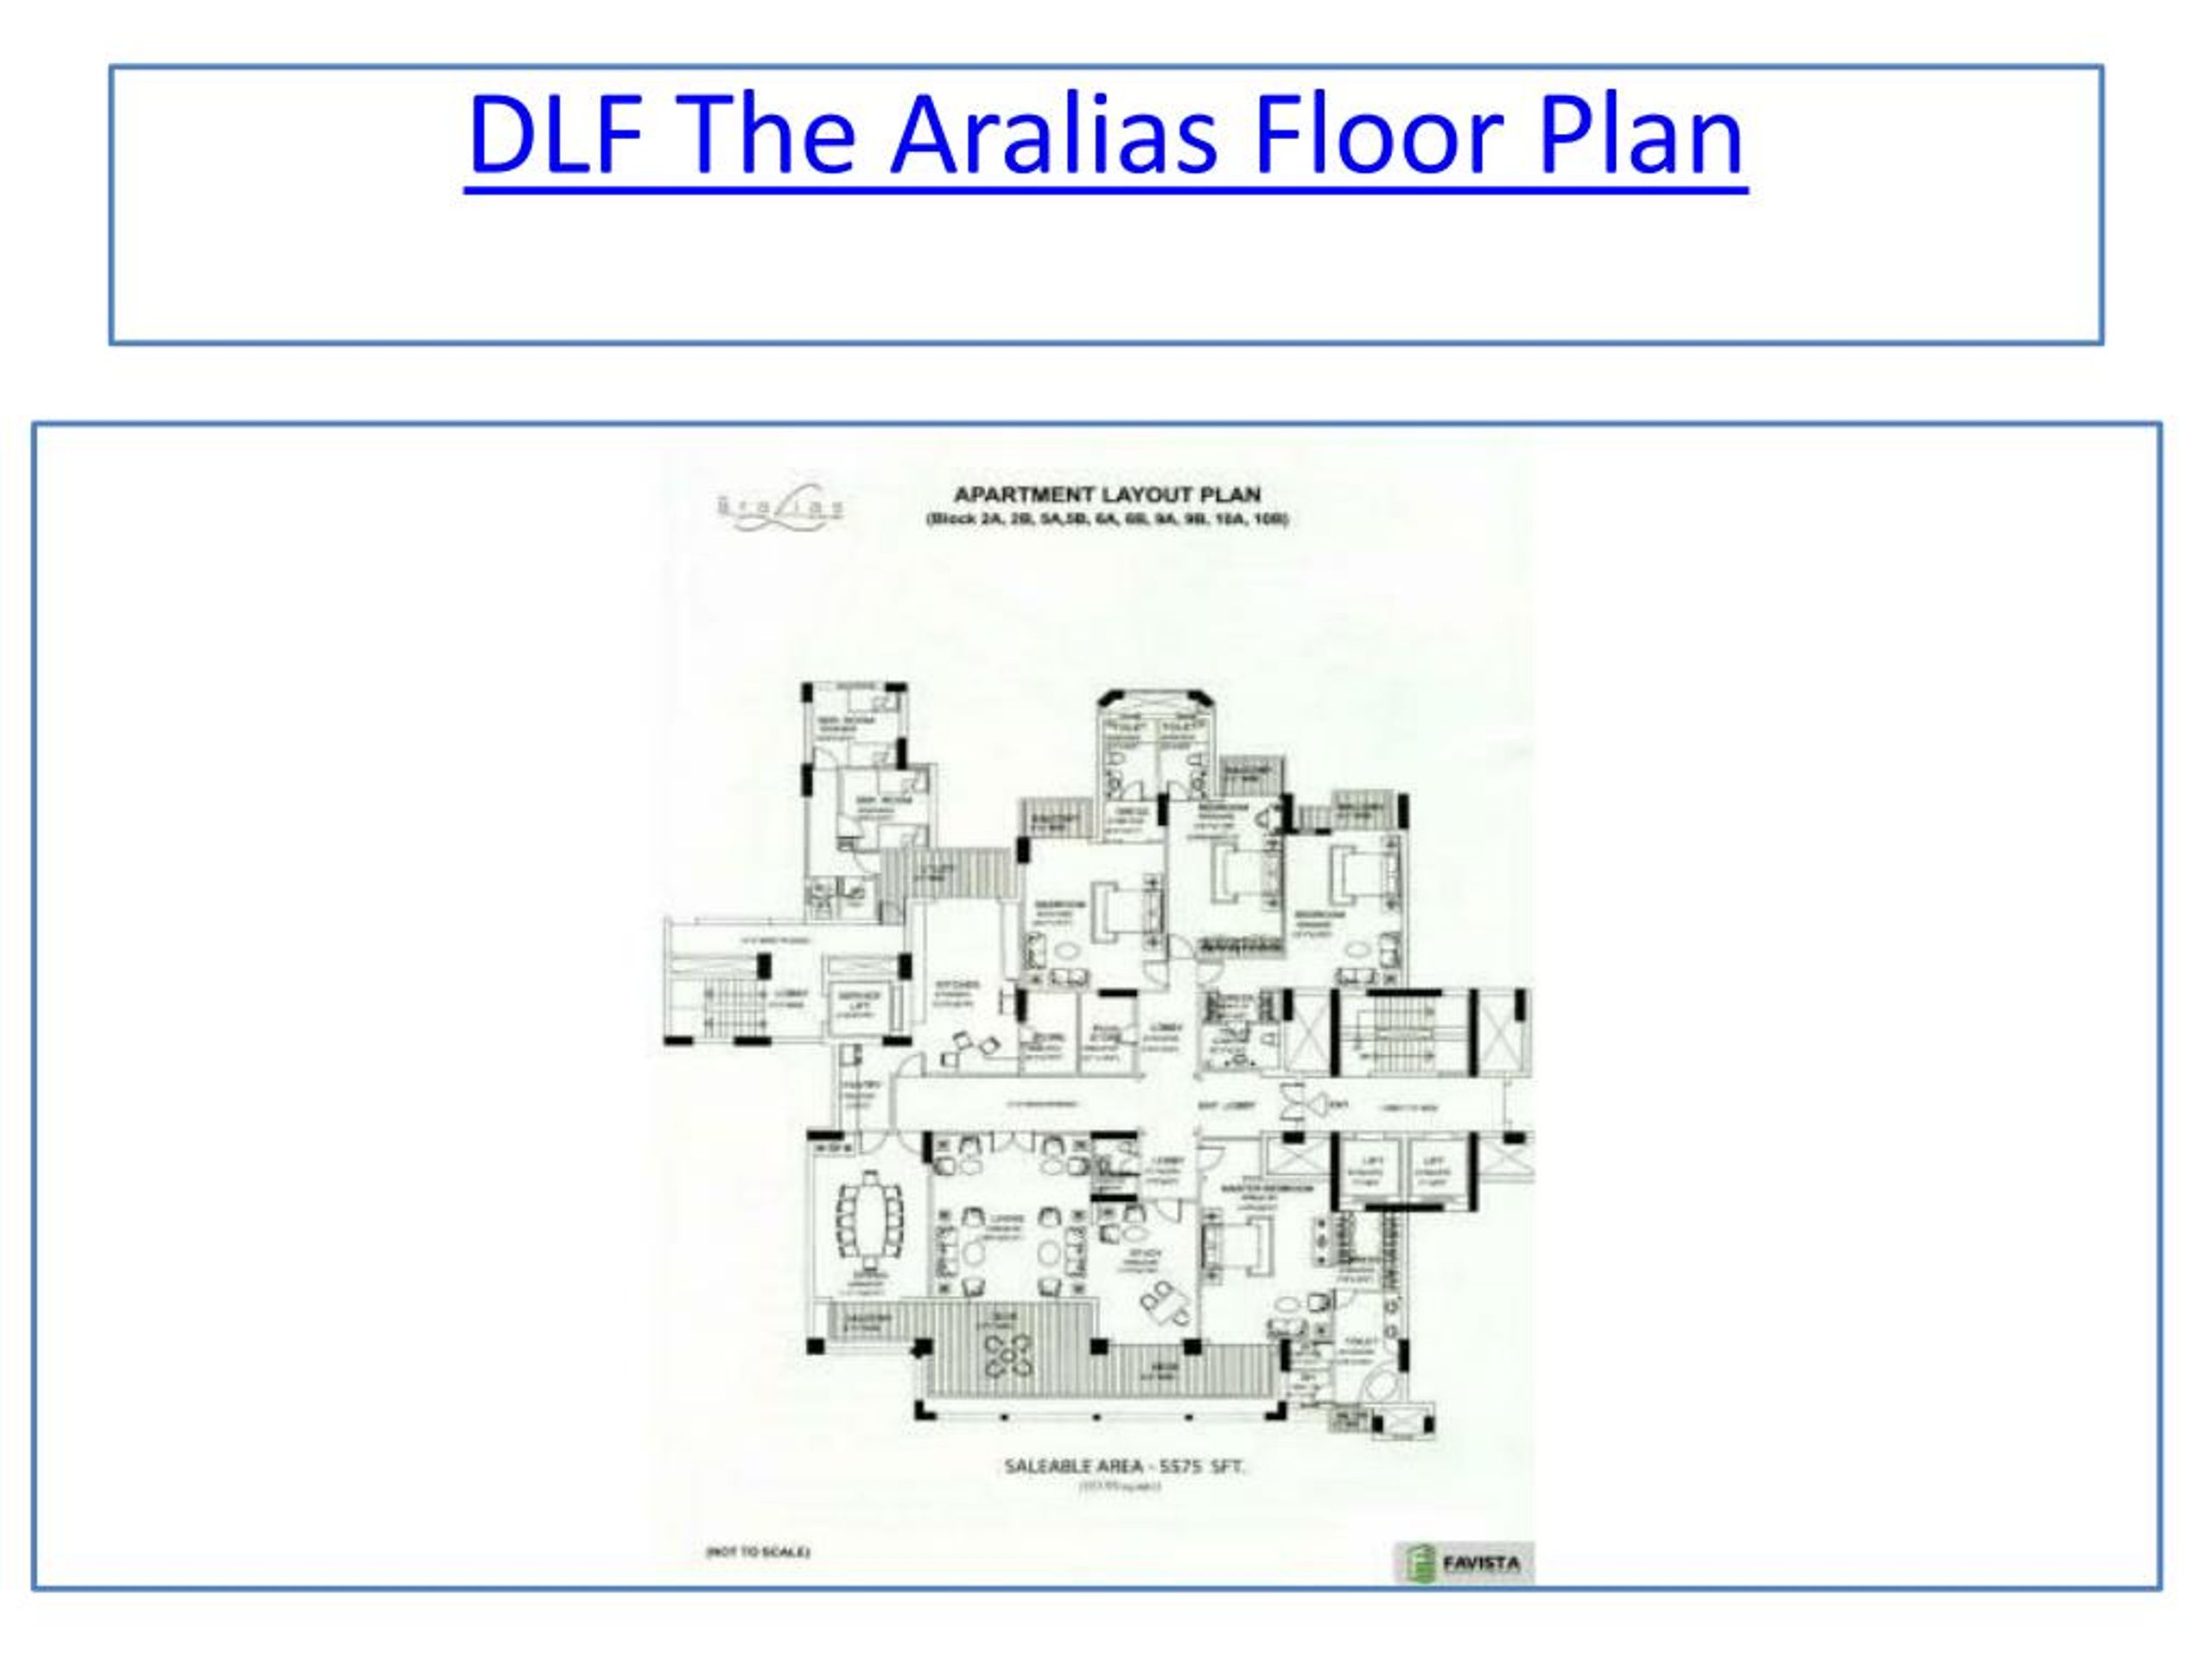 PPT DLF The Aralias in Sector 42 Gurgaon PowerPoint